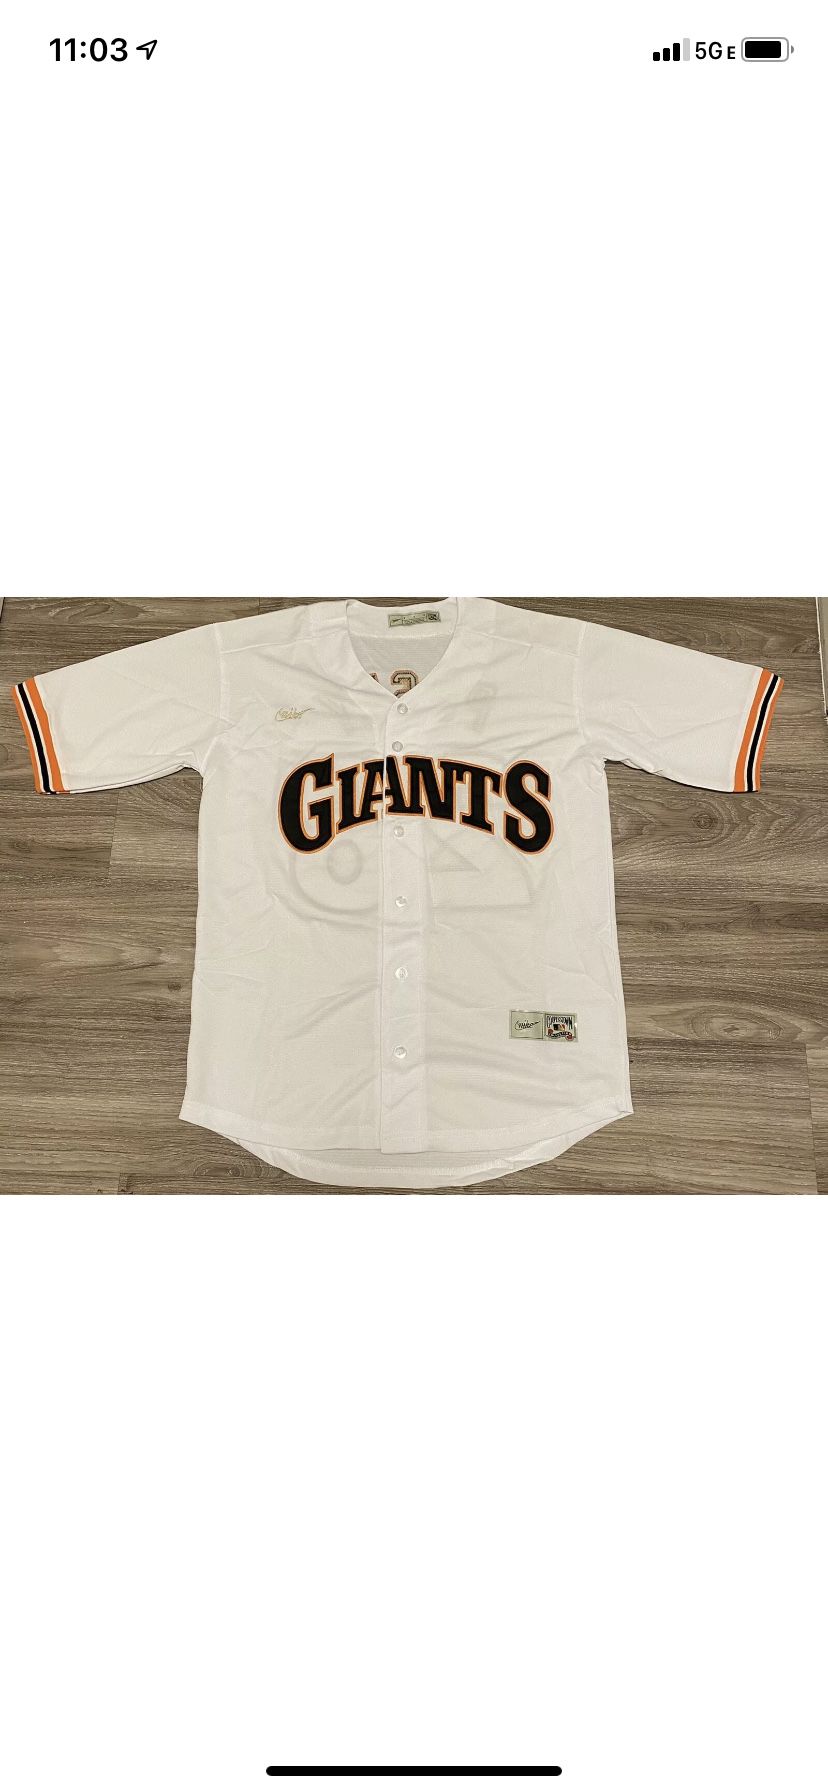 San Francisco Giants Buster Posey Throwback Jersey Adult Size Medium Brand New